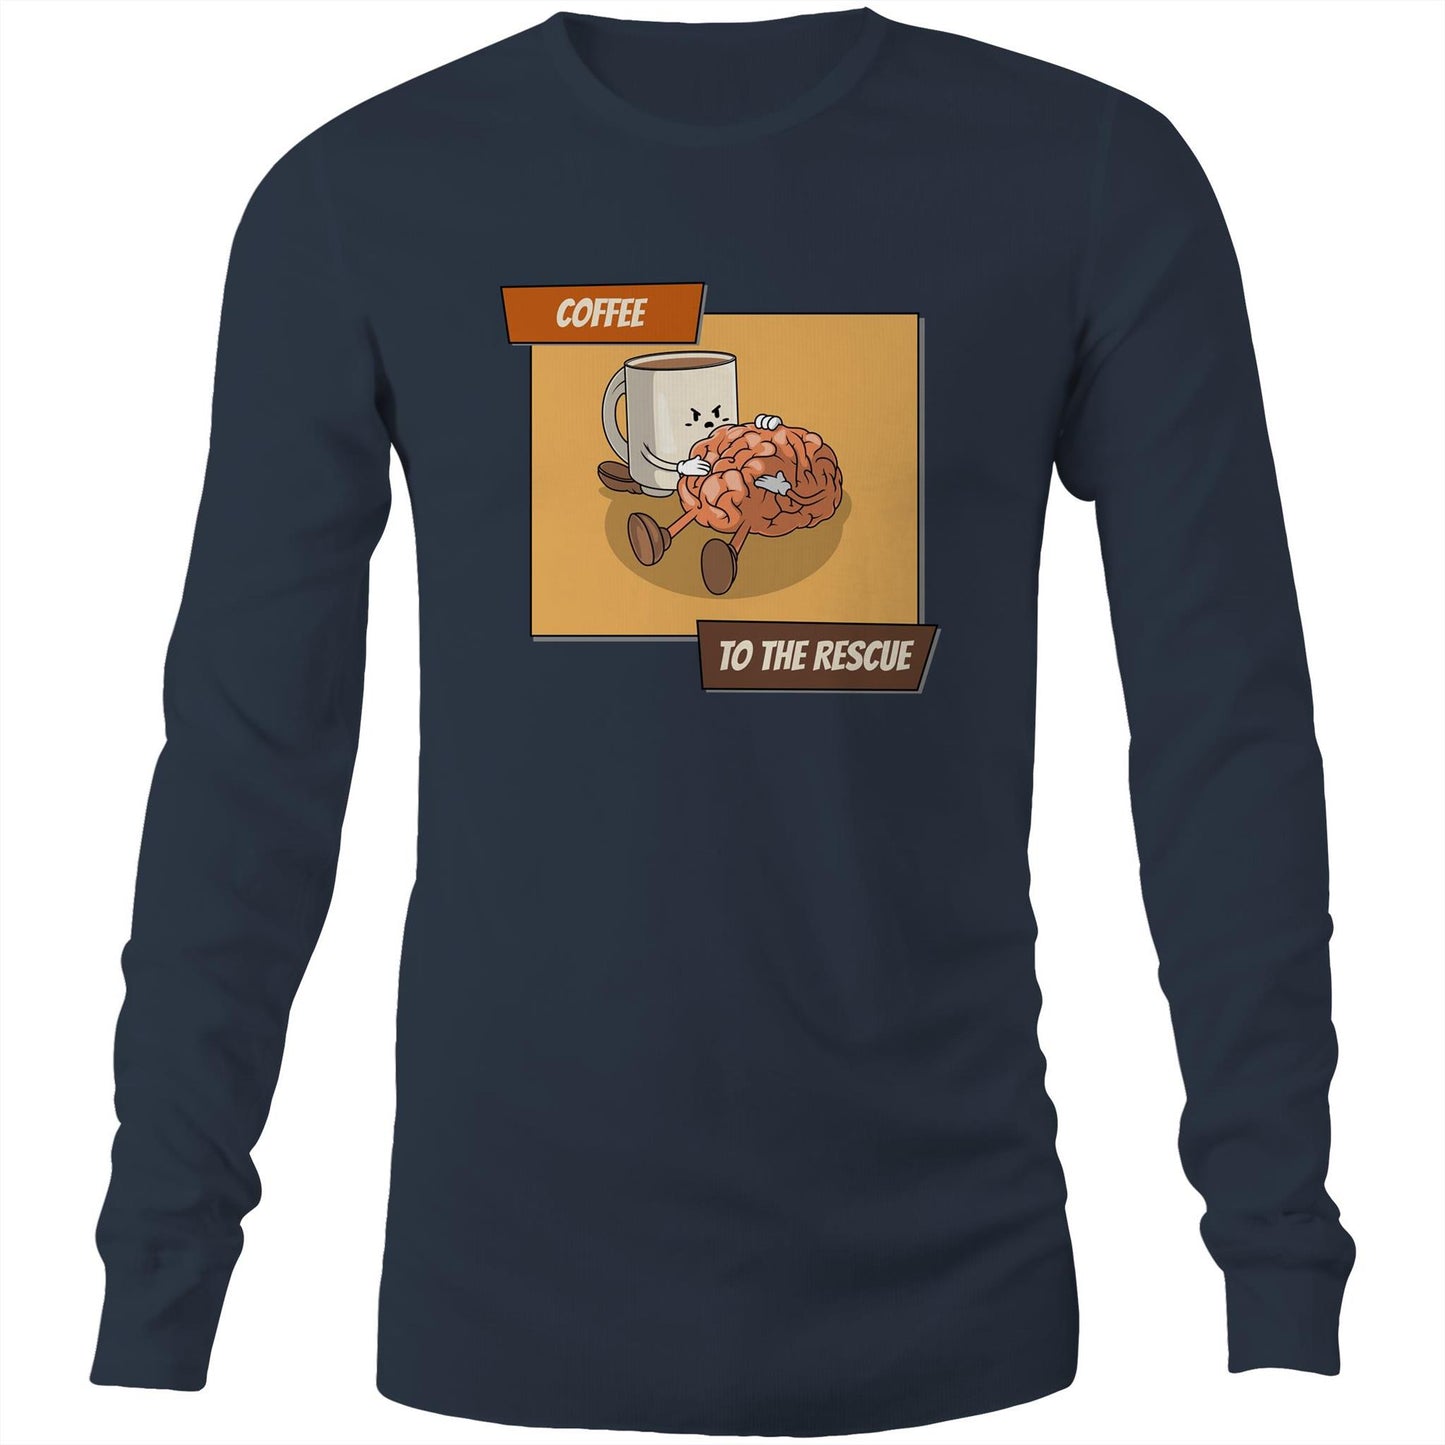 Coffee To The Rescue - Long Sleeve T-Shirt Navy Unisex Long Sleeve T-shirt Coffee